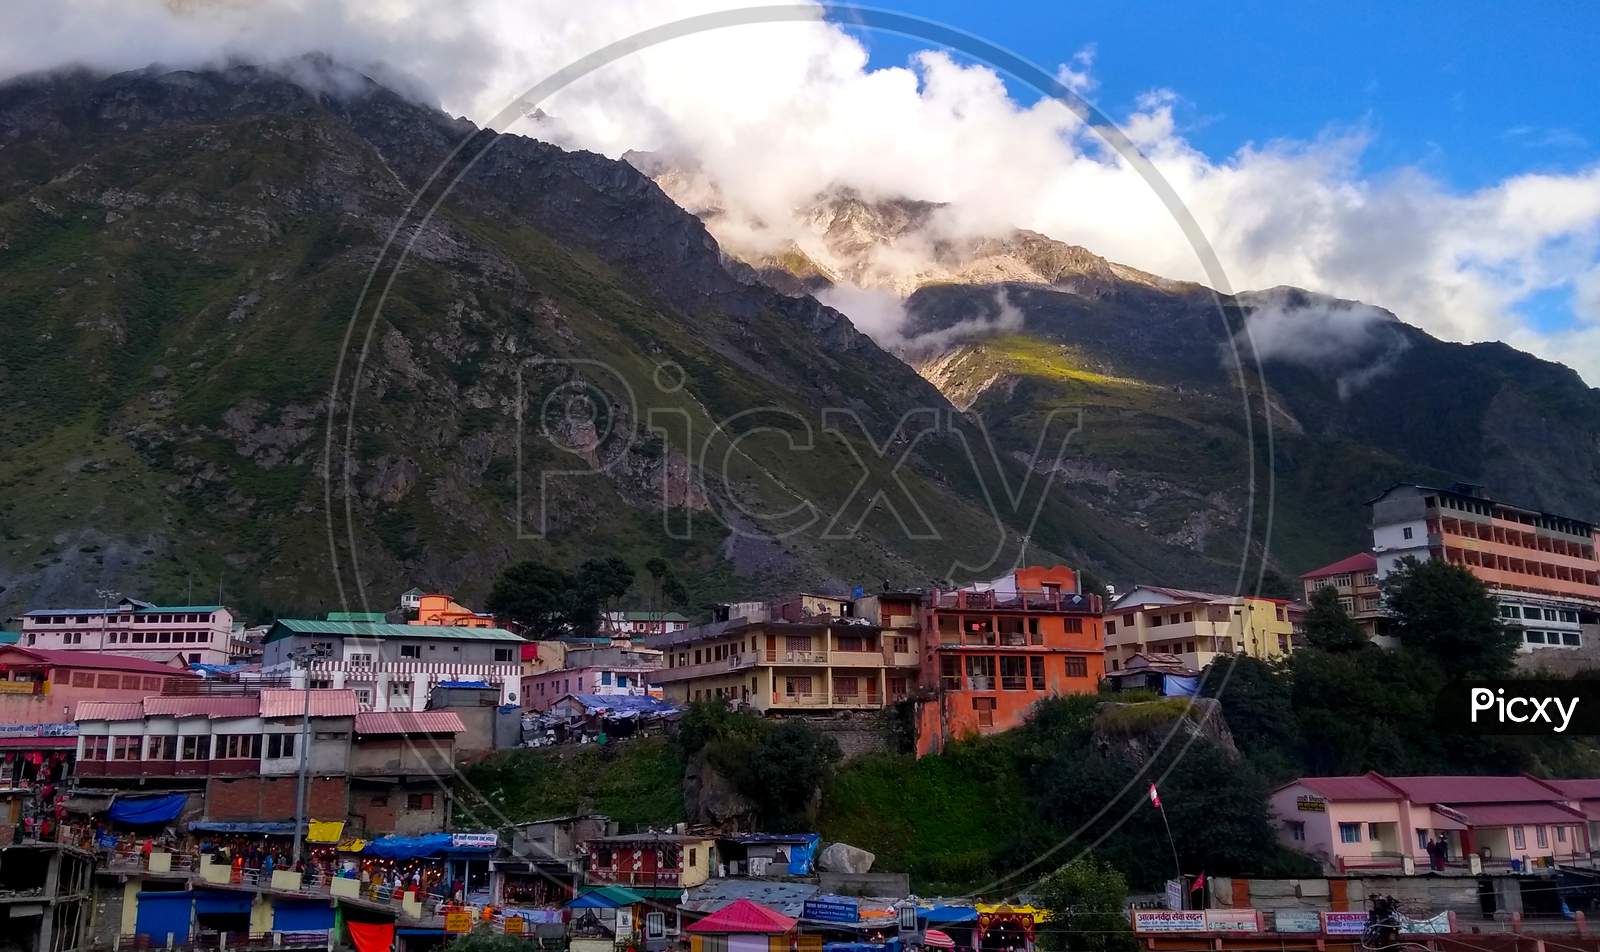 A view of Badrinath temple surroundings